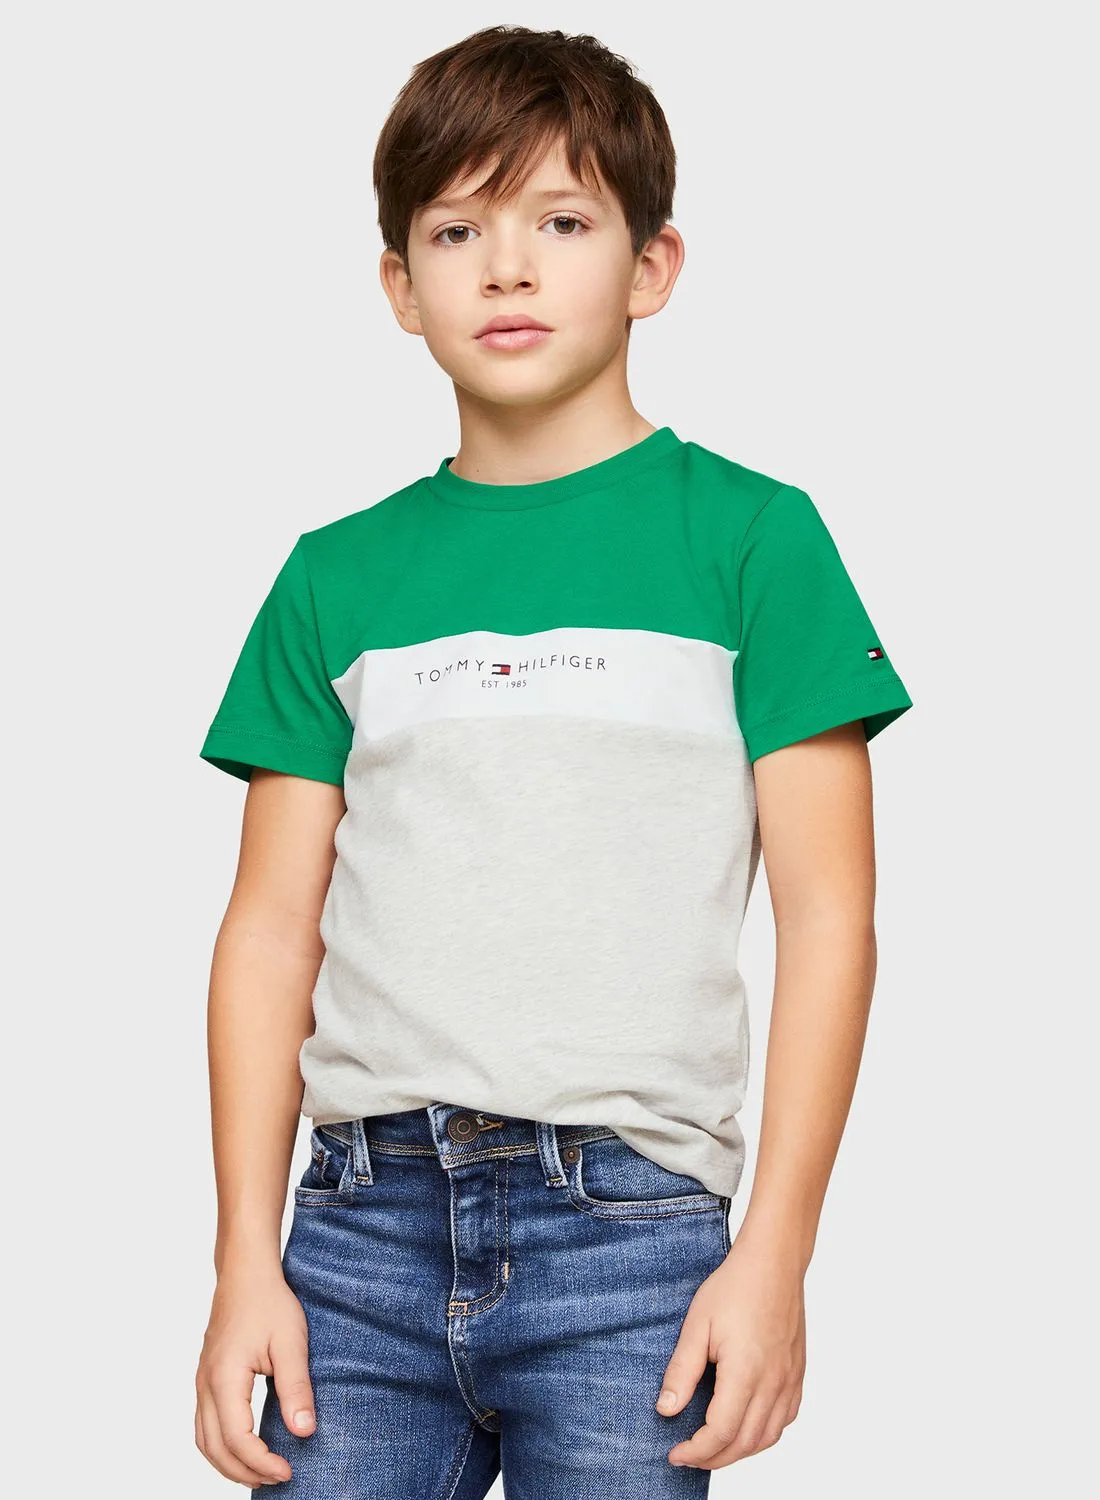 TOMMY HILFIGER Youth Color Block T-Shirt